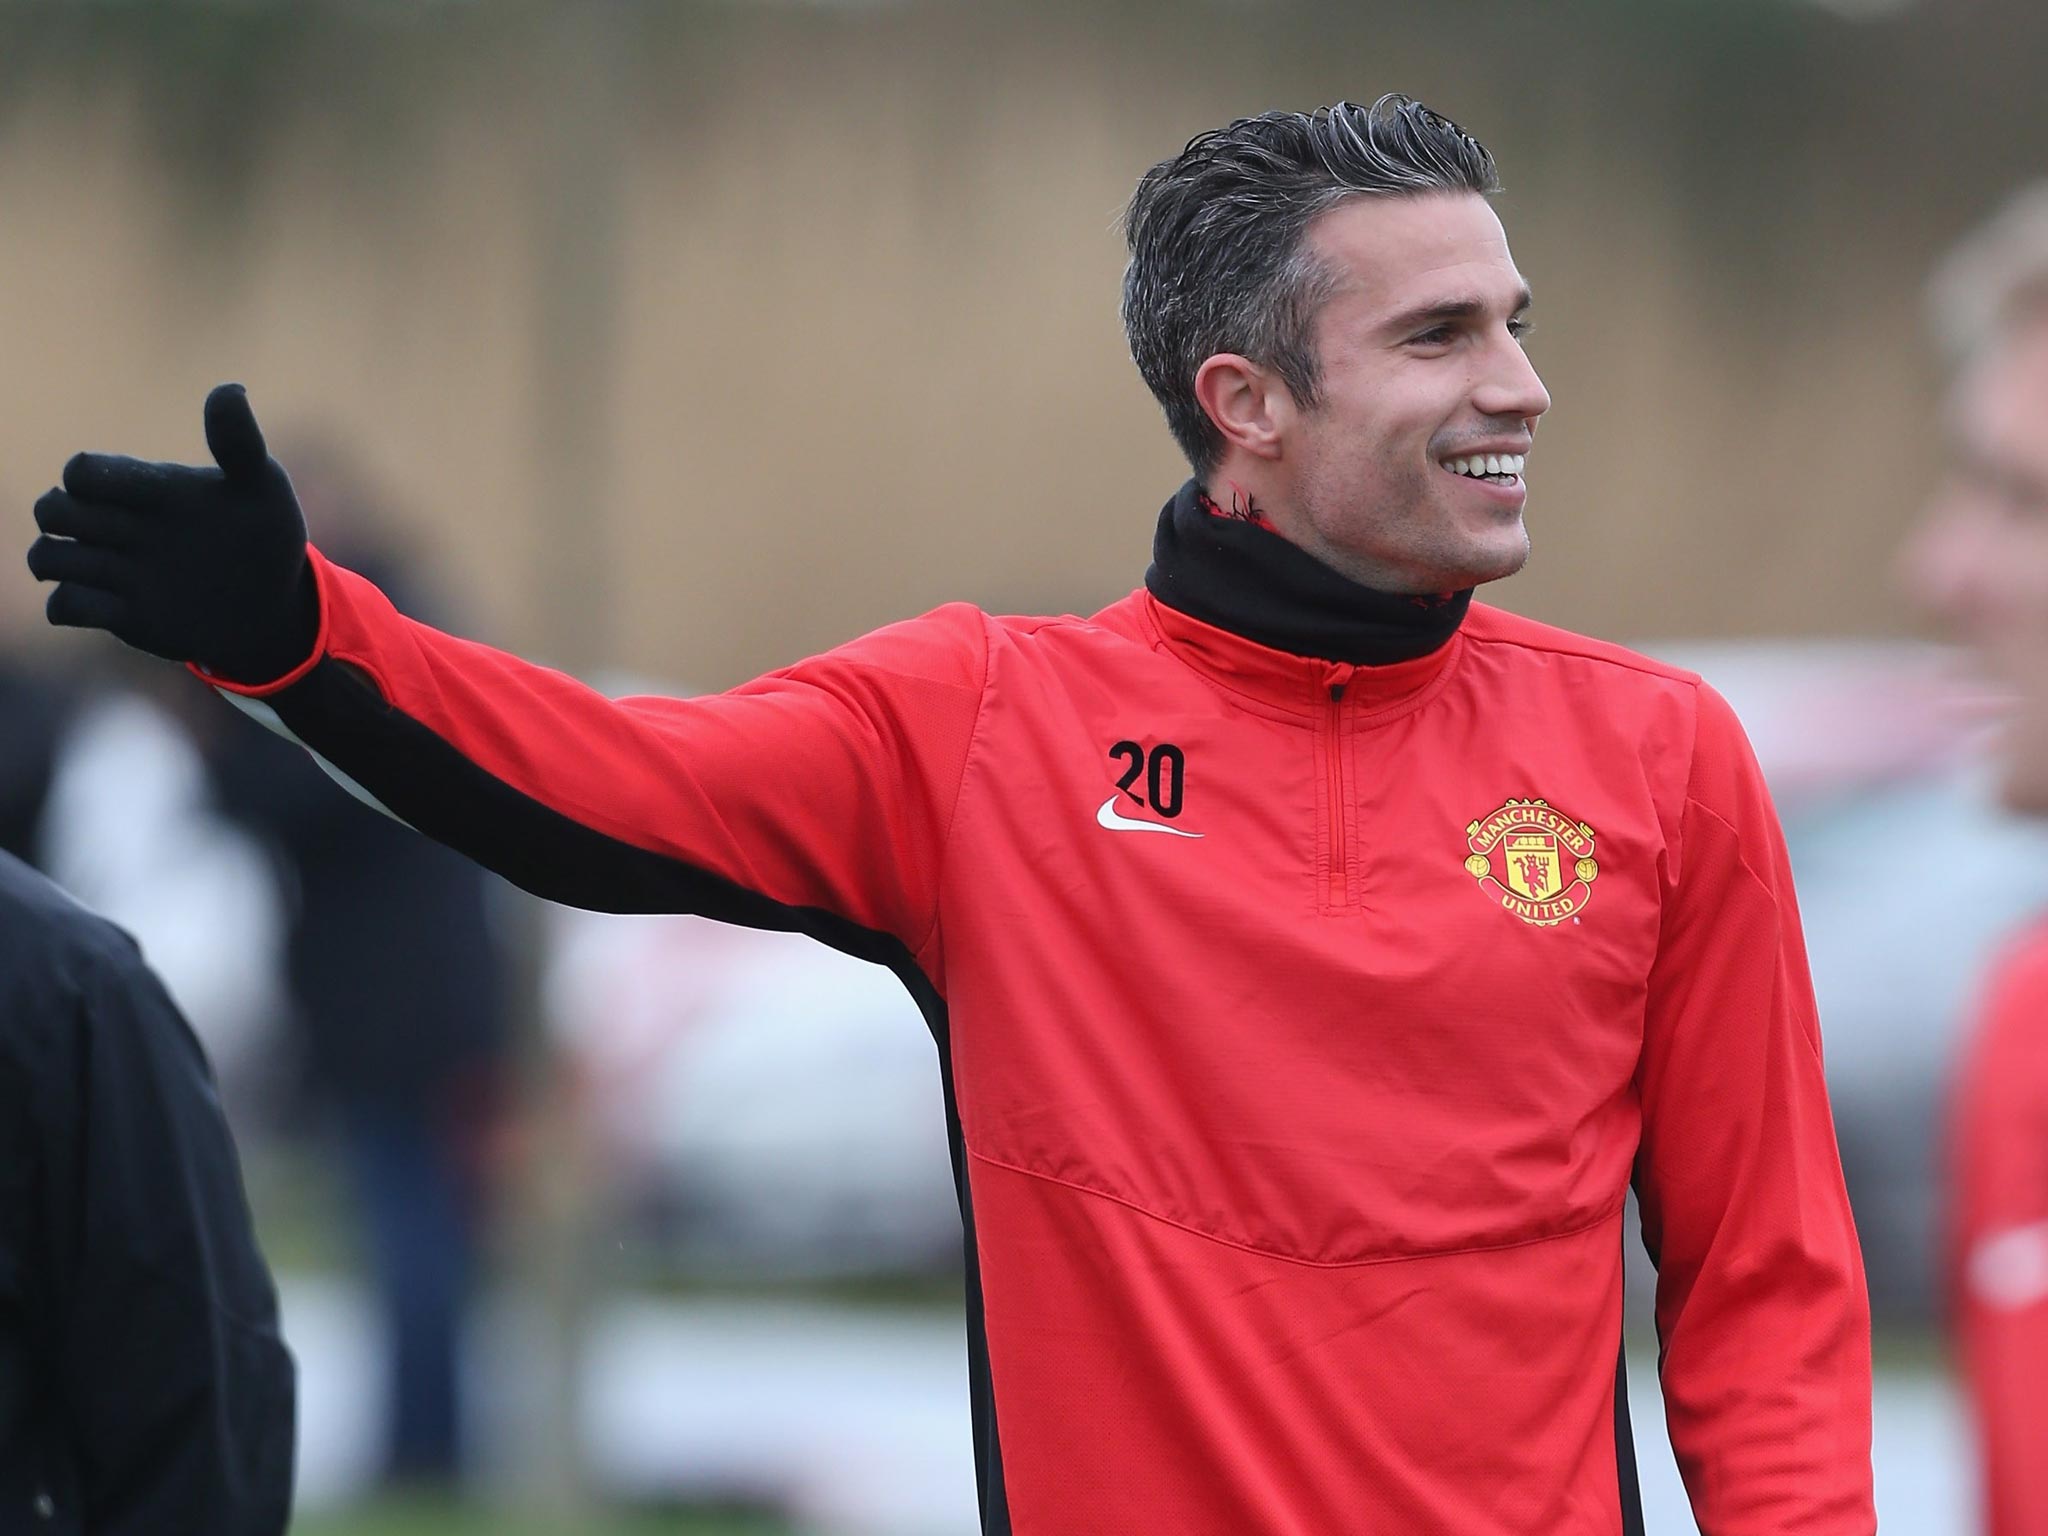 Robin van Persie’s return from injury has restored United’s most
potent attacking combination